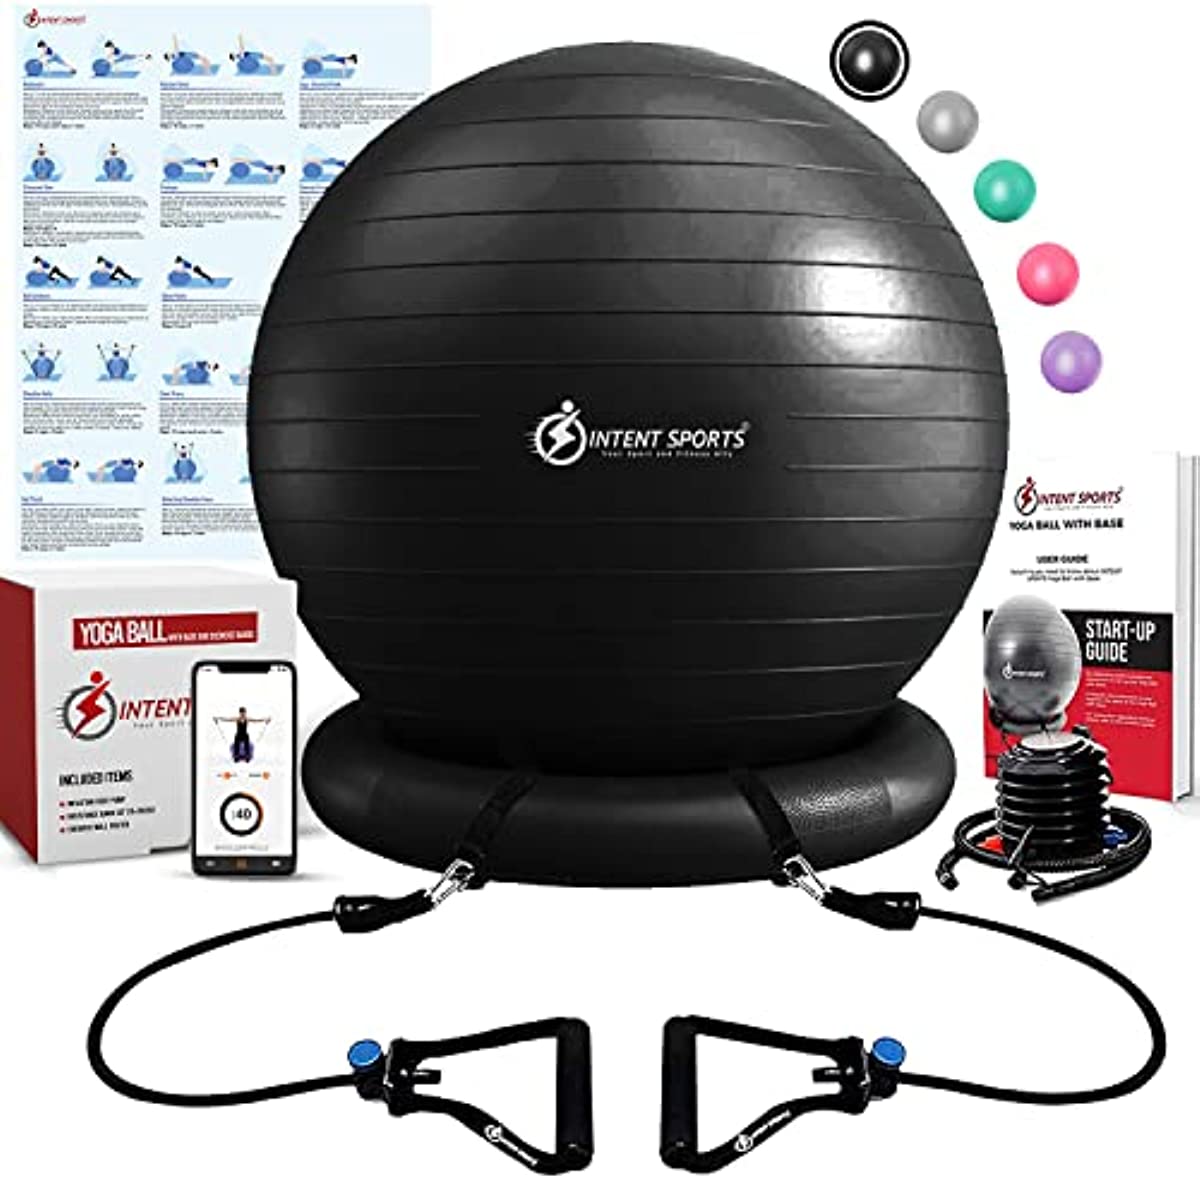 Intent Sports Yoga Ball Chair – Stability Ball with Inflatable Stability Base & Resistance Bands, Fitness Ball for Home Gym, Office, Improves Back Pain, Core, Posture & Balance (65 cm)